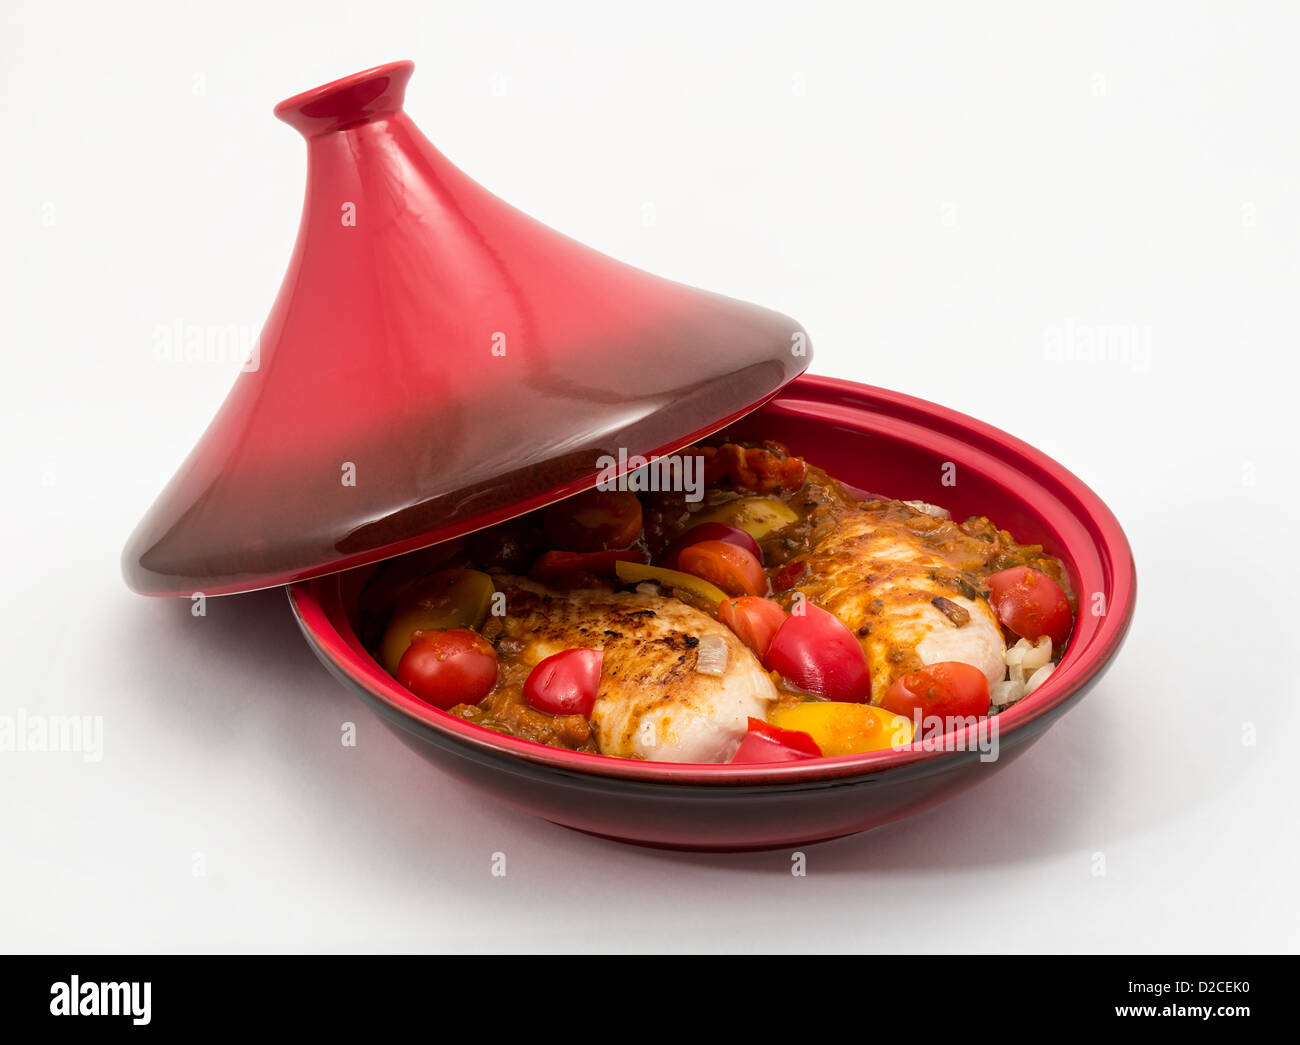 Tagine (Tajine) a type of cookware from Morocco, shown here with a prepared chicken dish ready for cooking. Stock Photo